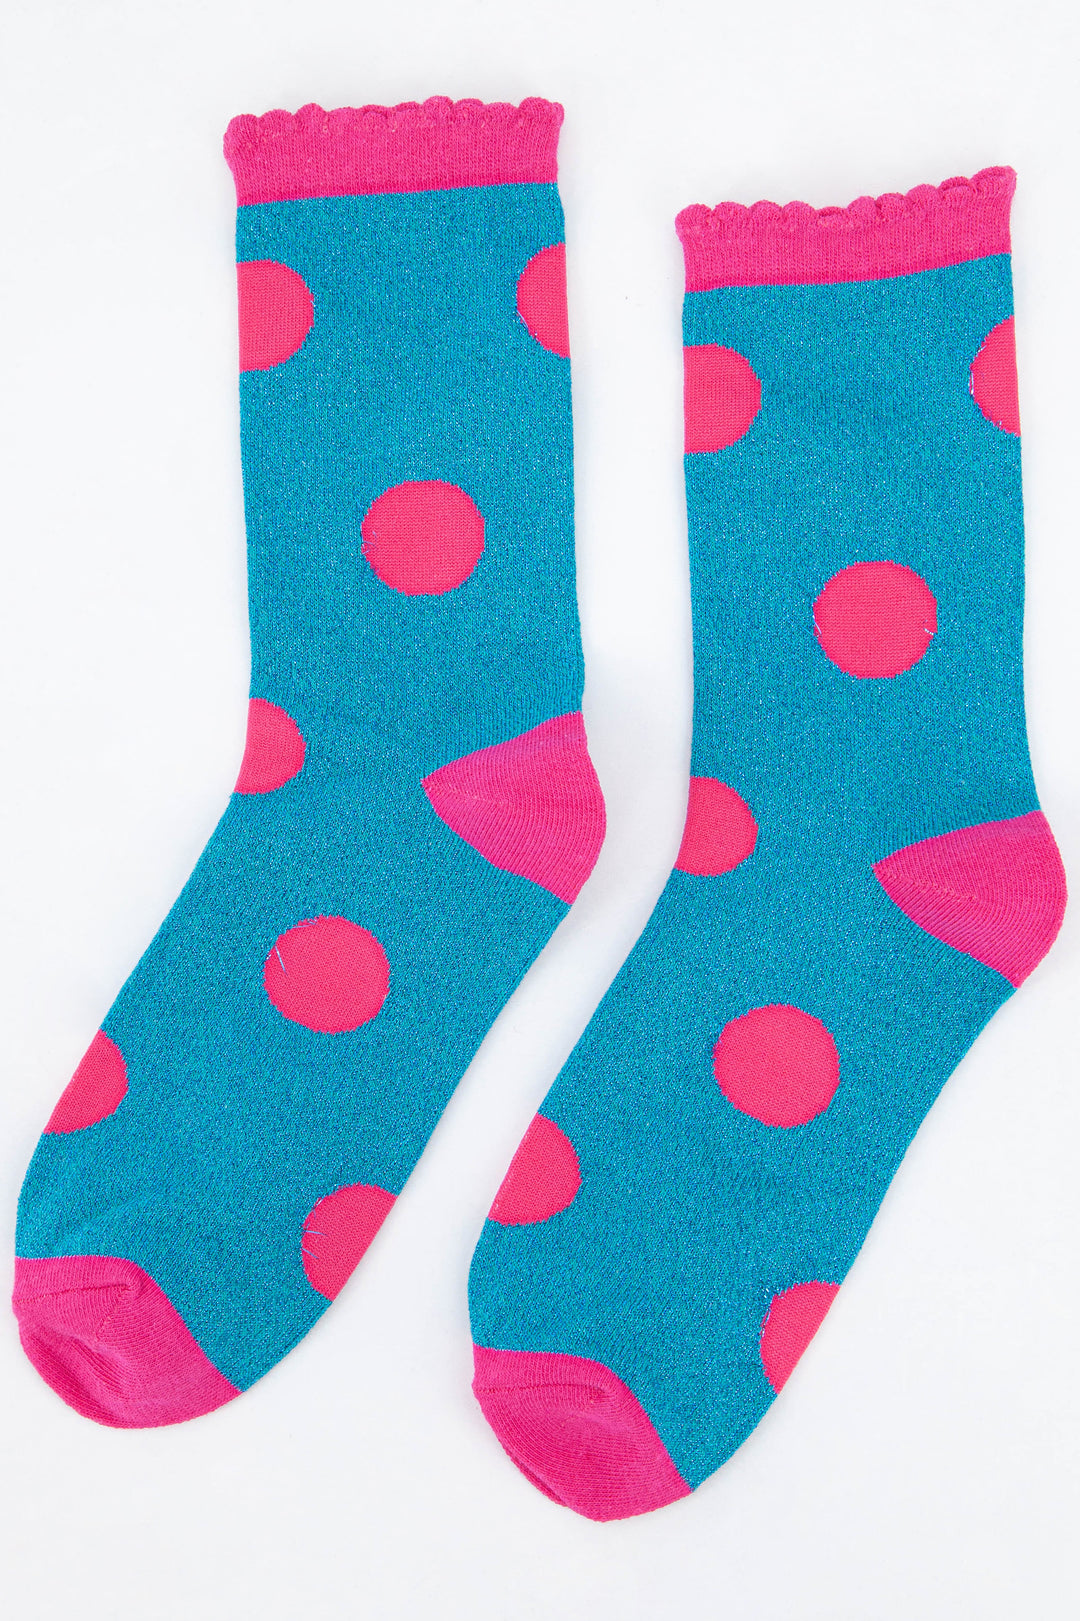 turquoise and pink glitter socks with a large spot print pattern